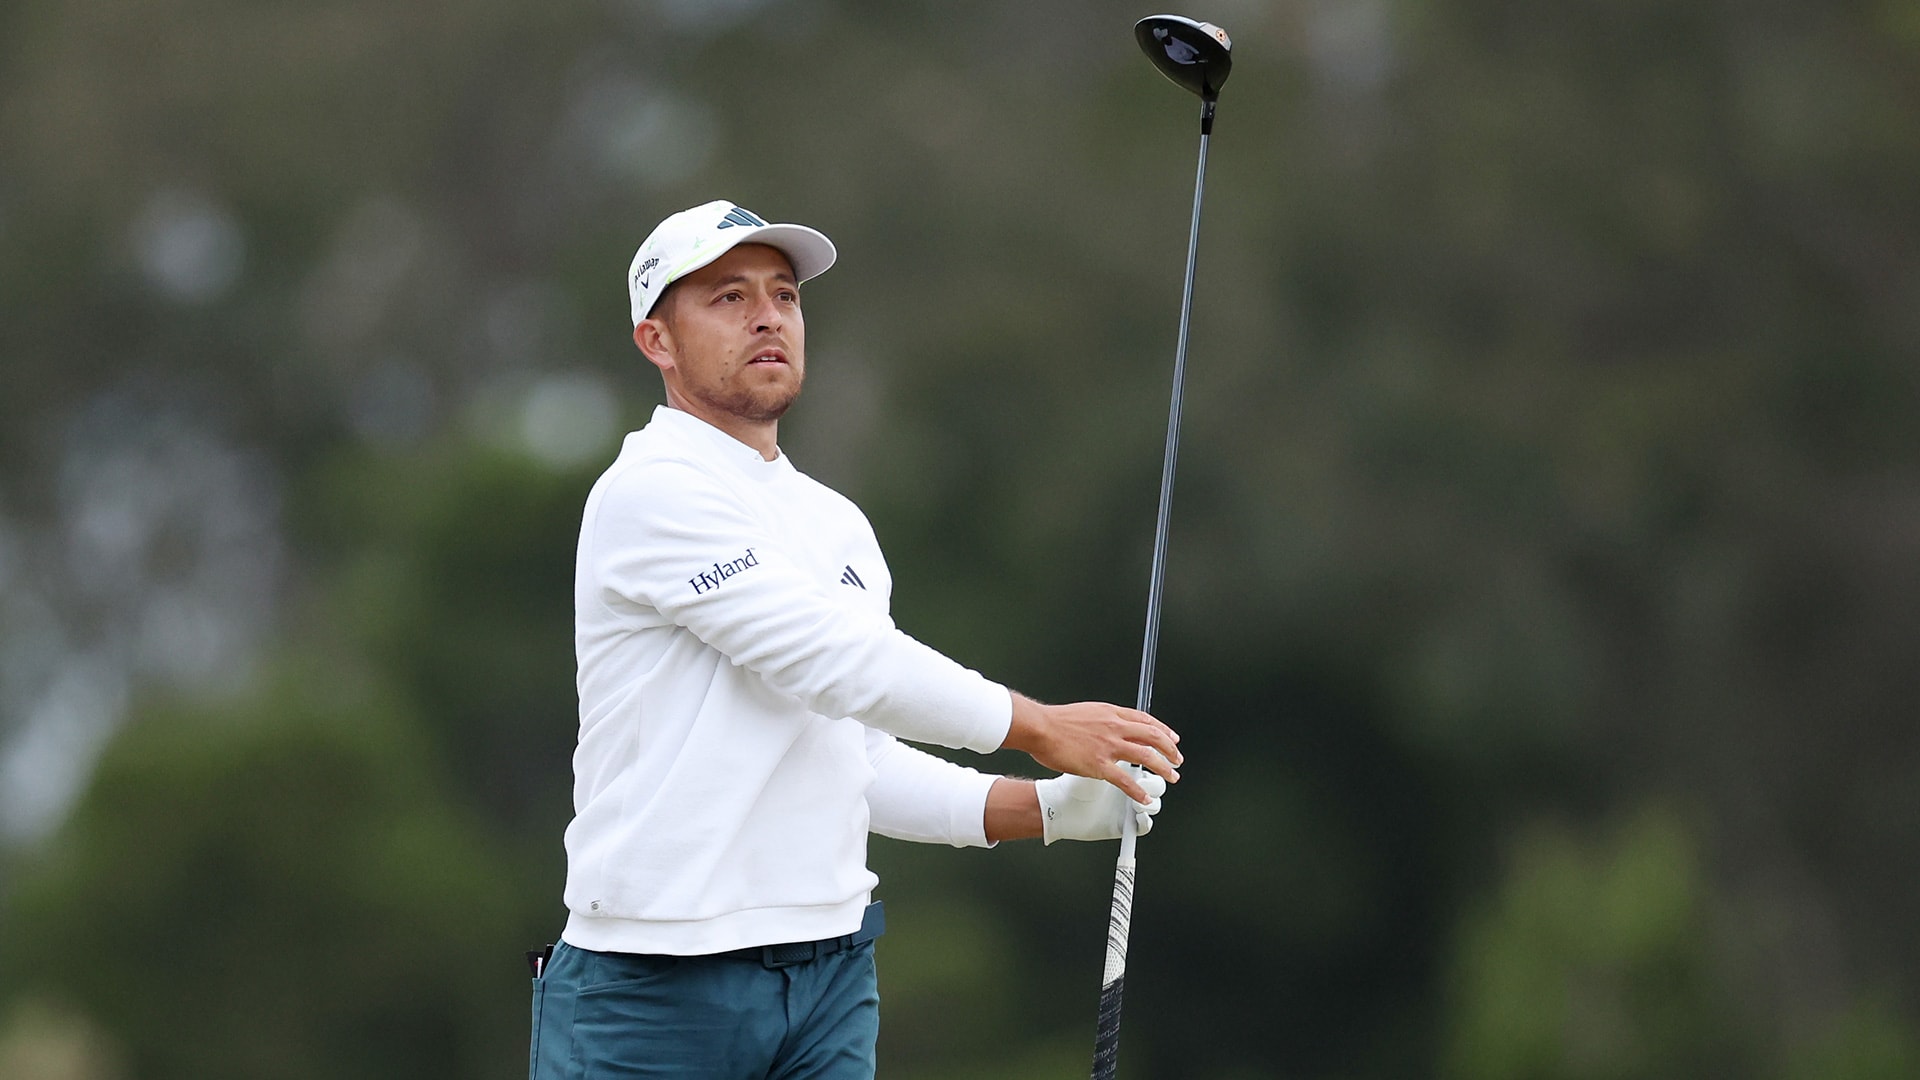 2023 U.S. Open: Xander Schauffele misses big with driver on Saturday, falls five off the pace